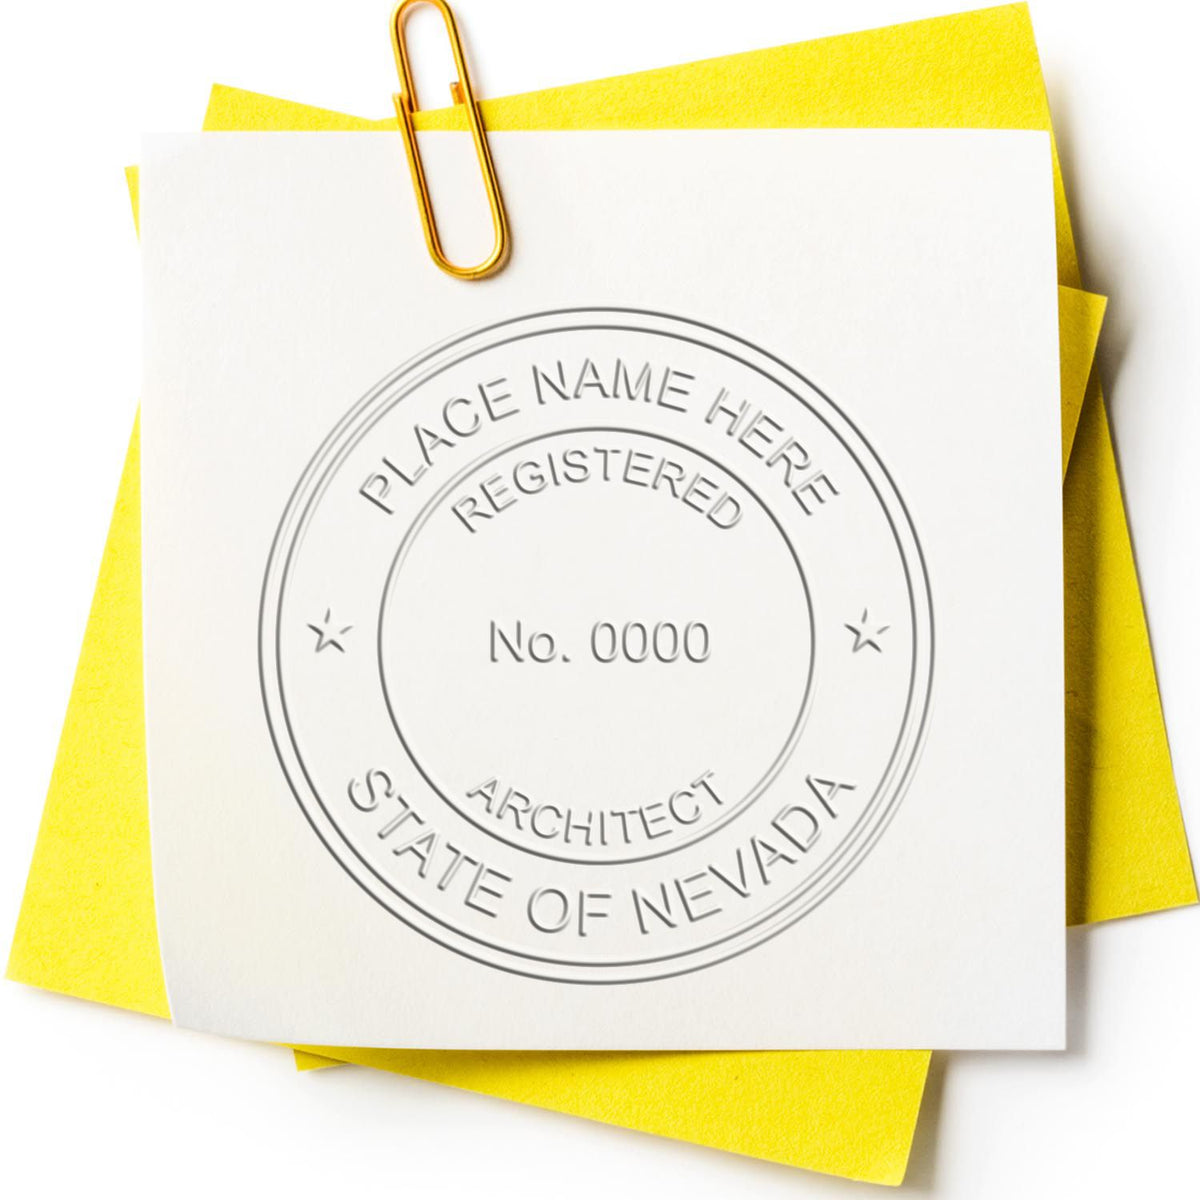 This paper is stamped with a sample imprint of the Extended Long Reach Nevada Architect Seal Embosser, signifying its quality and reliability.